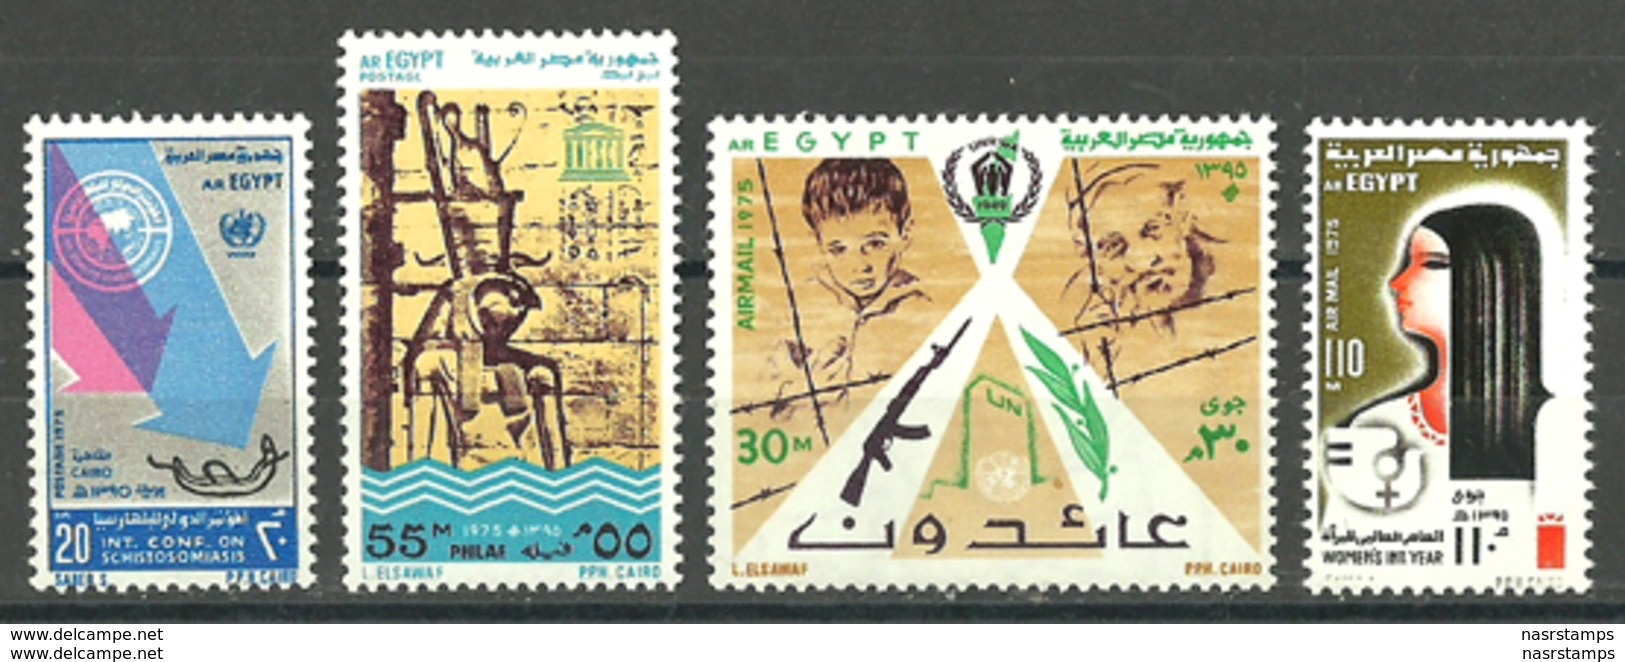 Egypt - 1975 - UN - UNESCO - ( United Nation Day - Temple Of Philae - Refugees - Schistosomiasis Conf. ) - MNH (**) - Aegyptologie